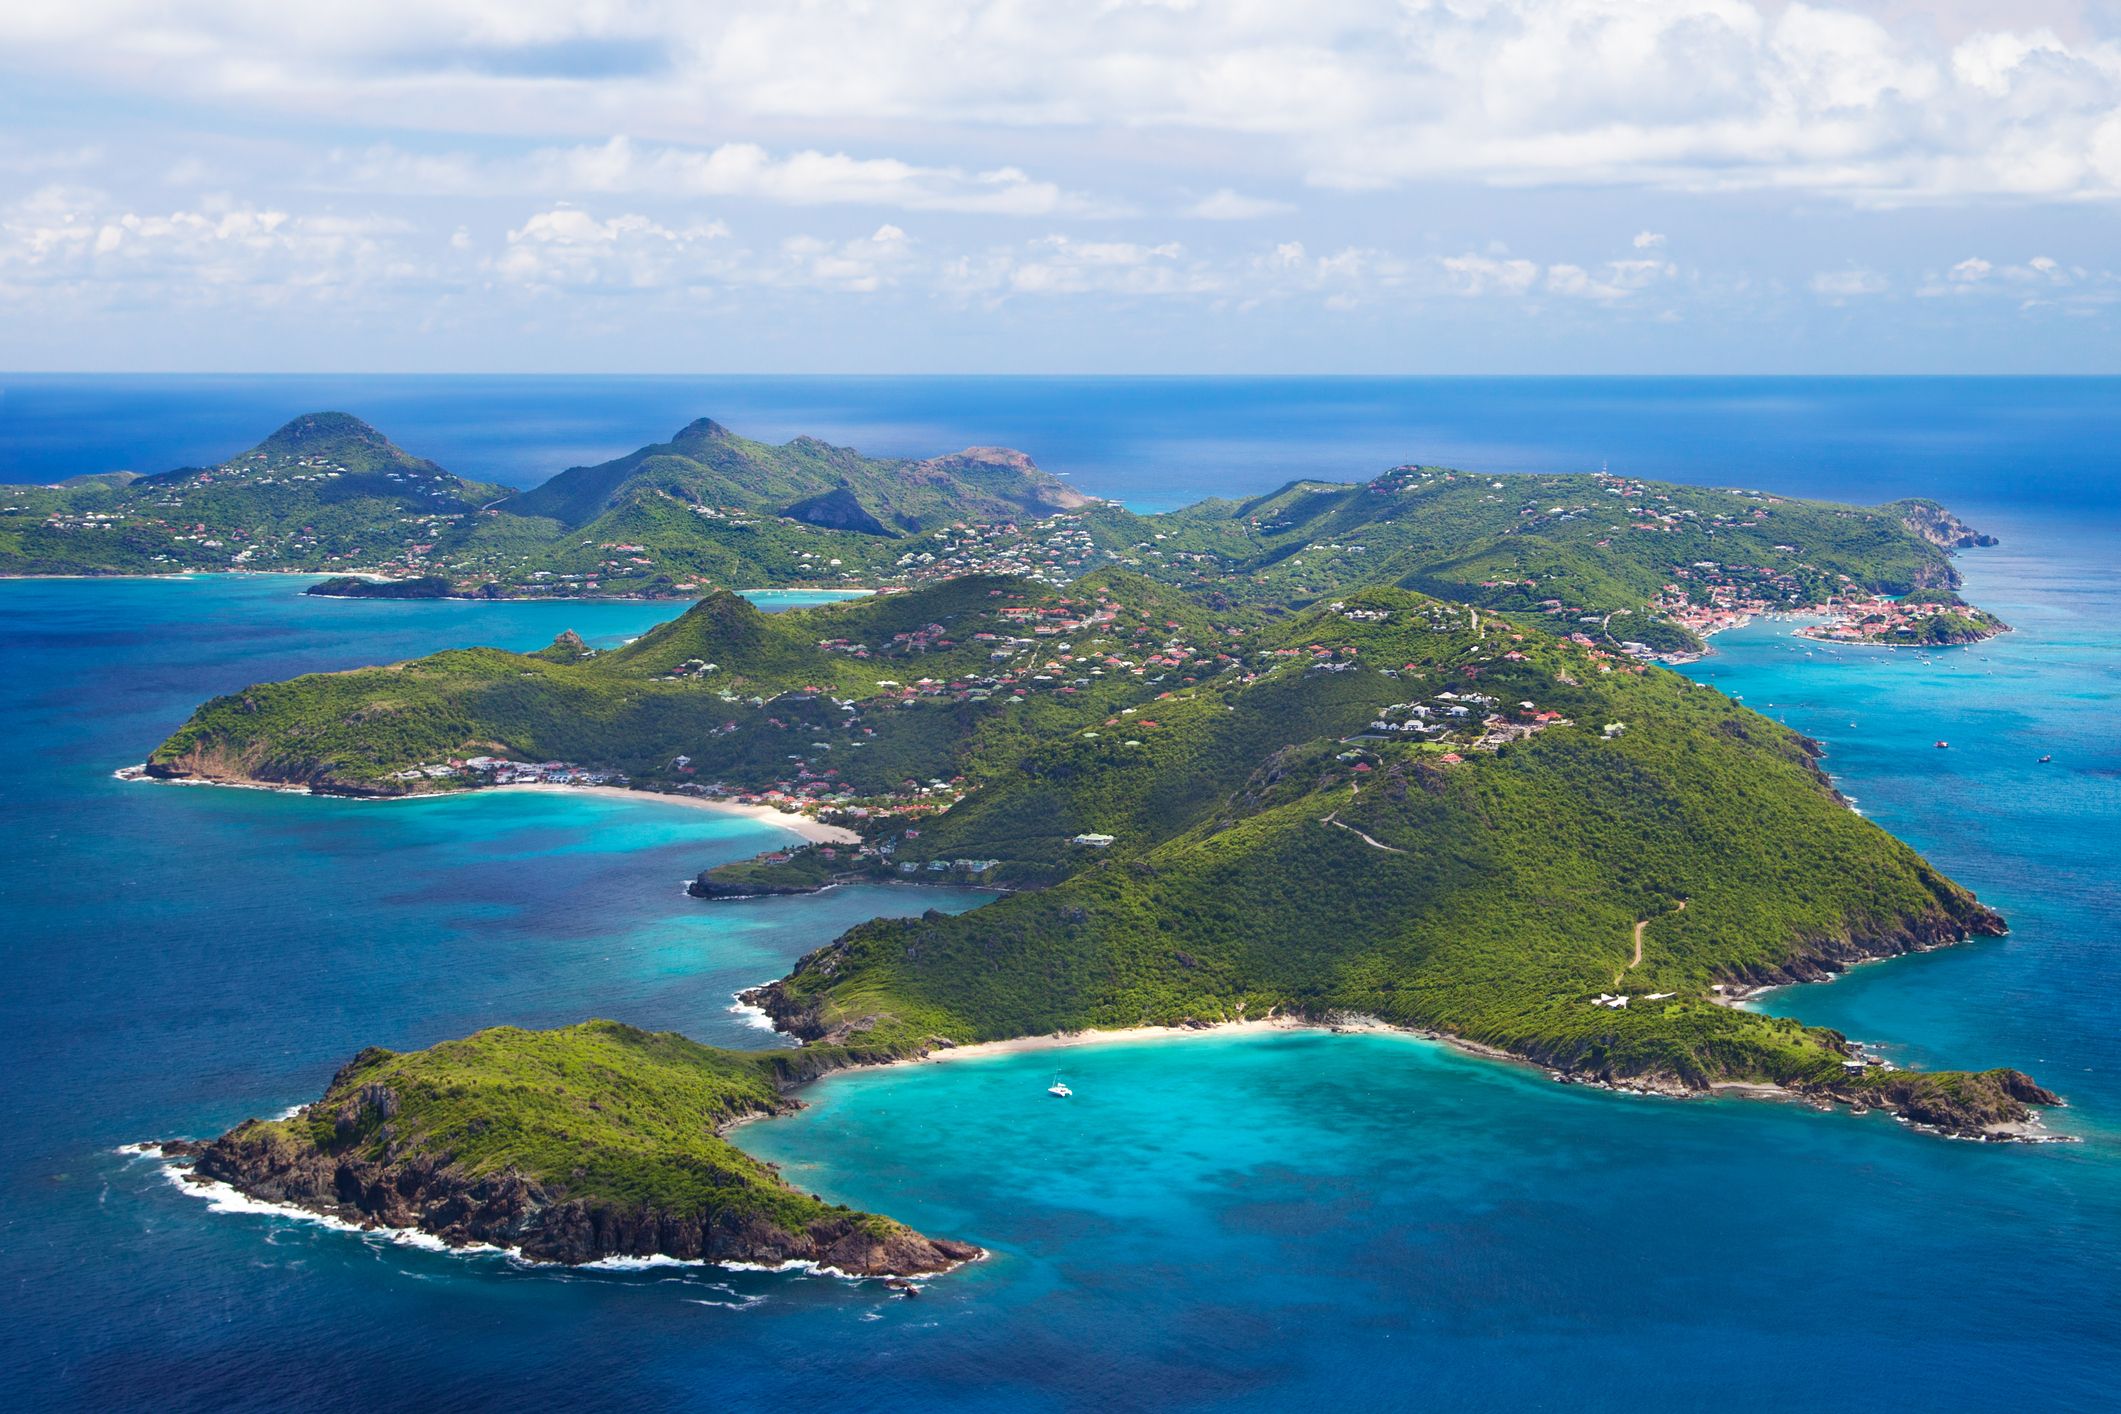 How to Get to St. Barts - The Easiest Way to Get to St Barths